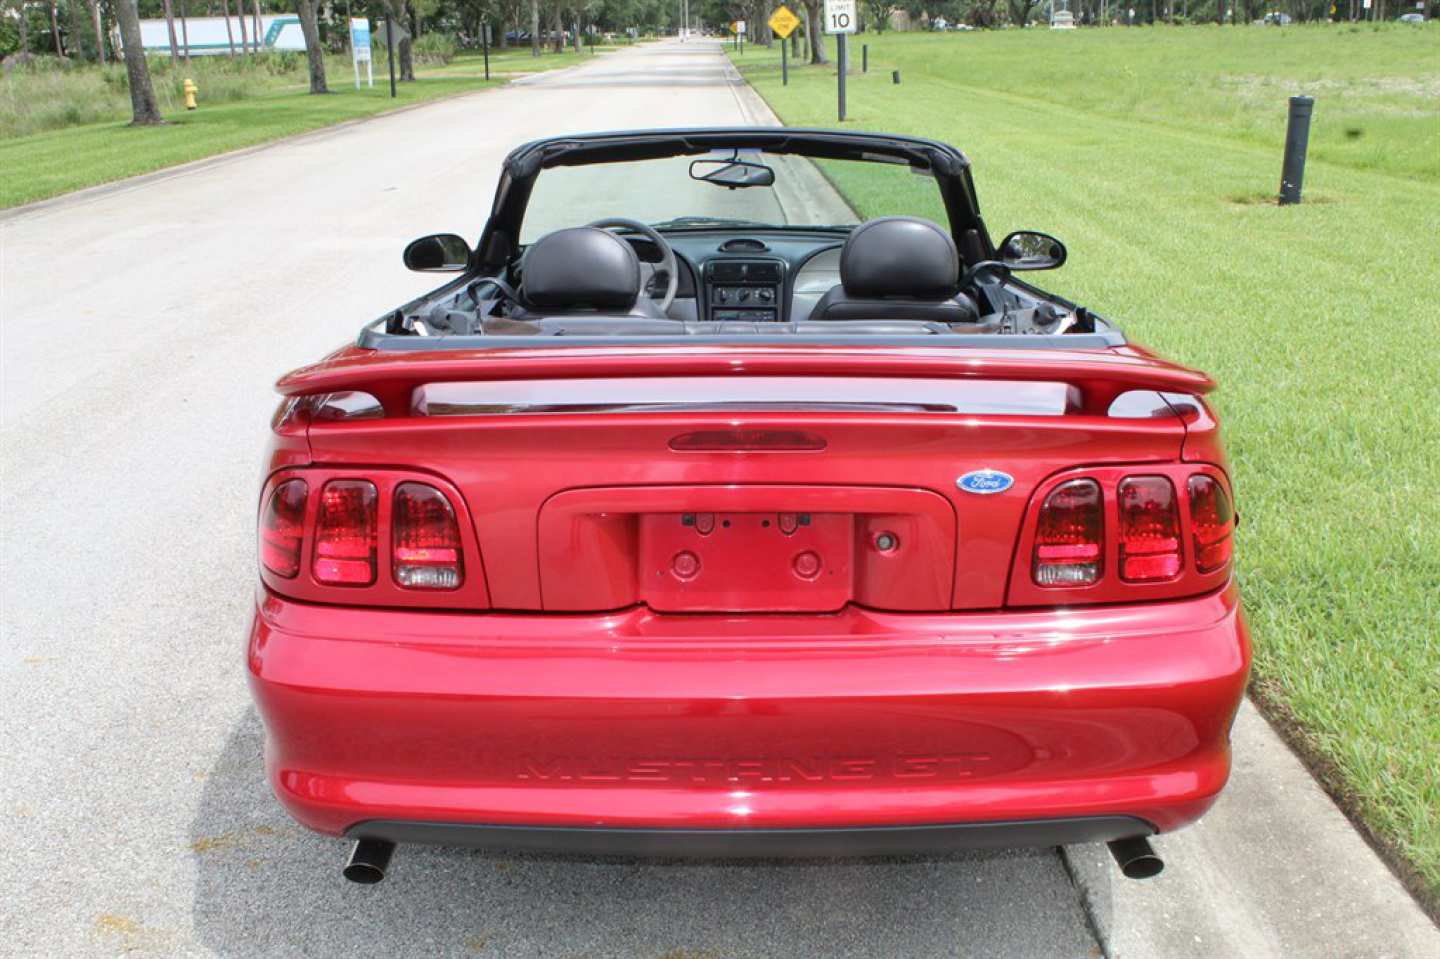 6th Image of a 1996 FORD MUSTANG GT